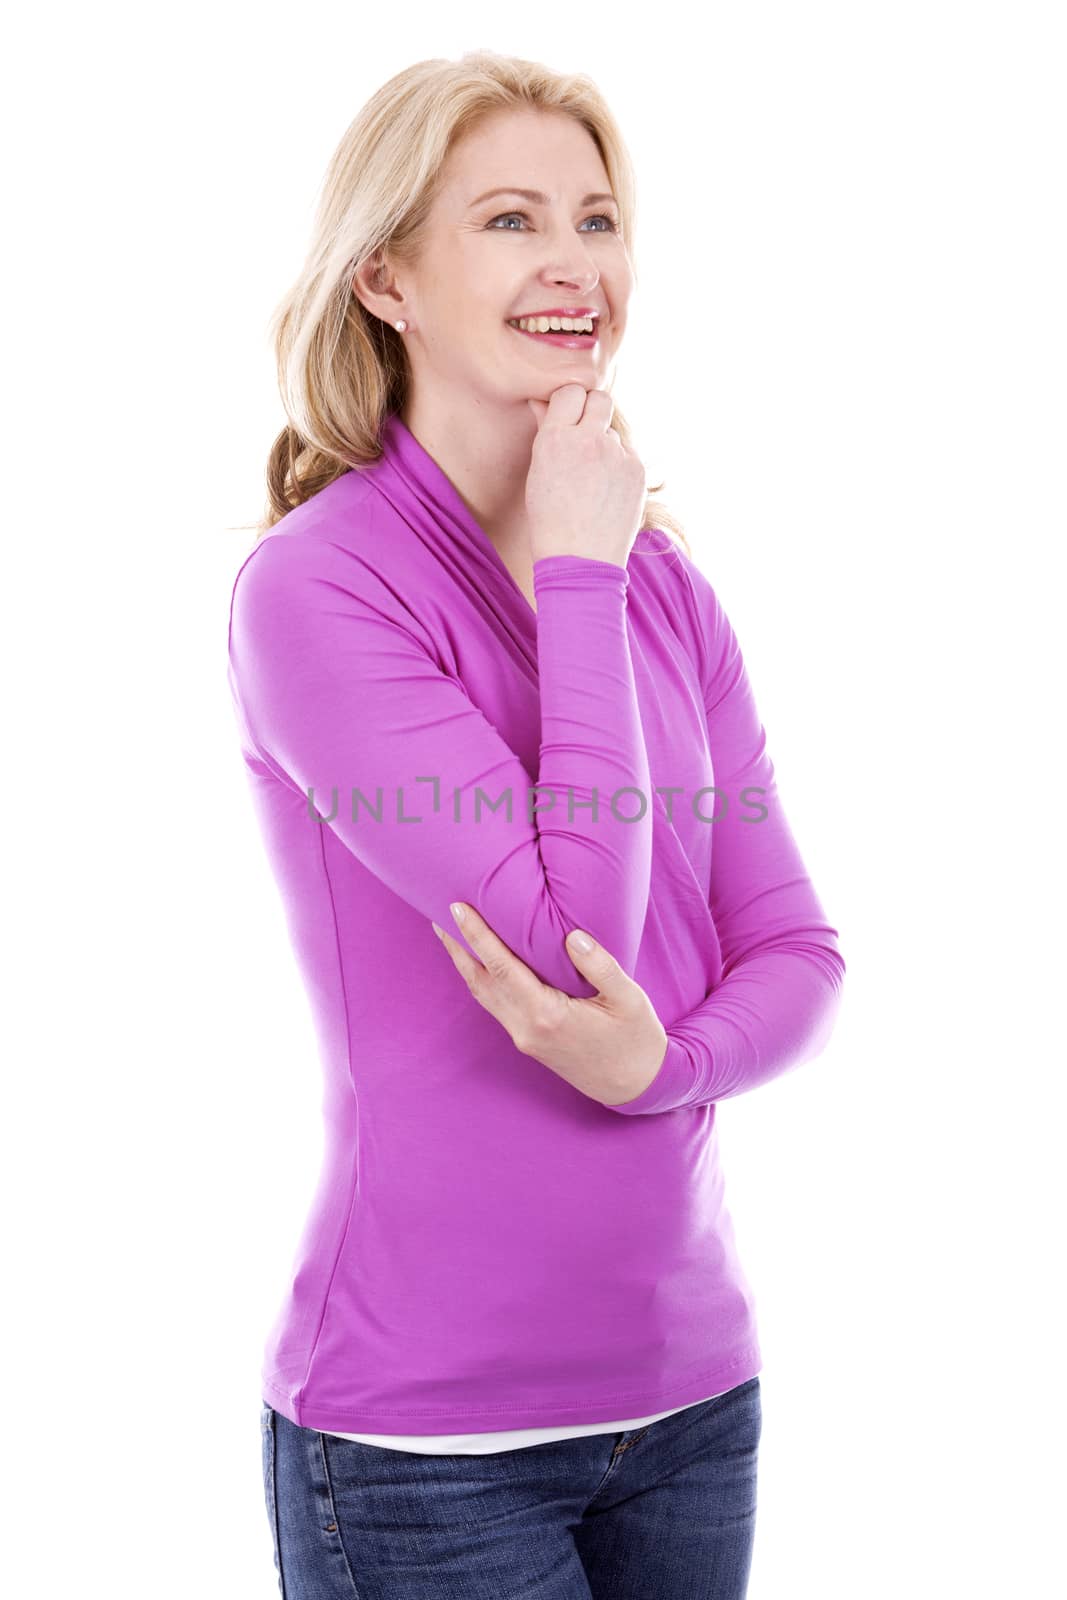 blond woman wearing purple top on white background